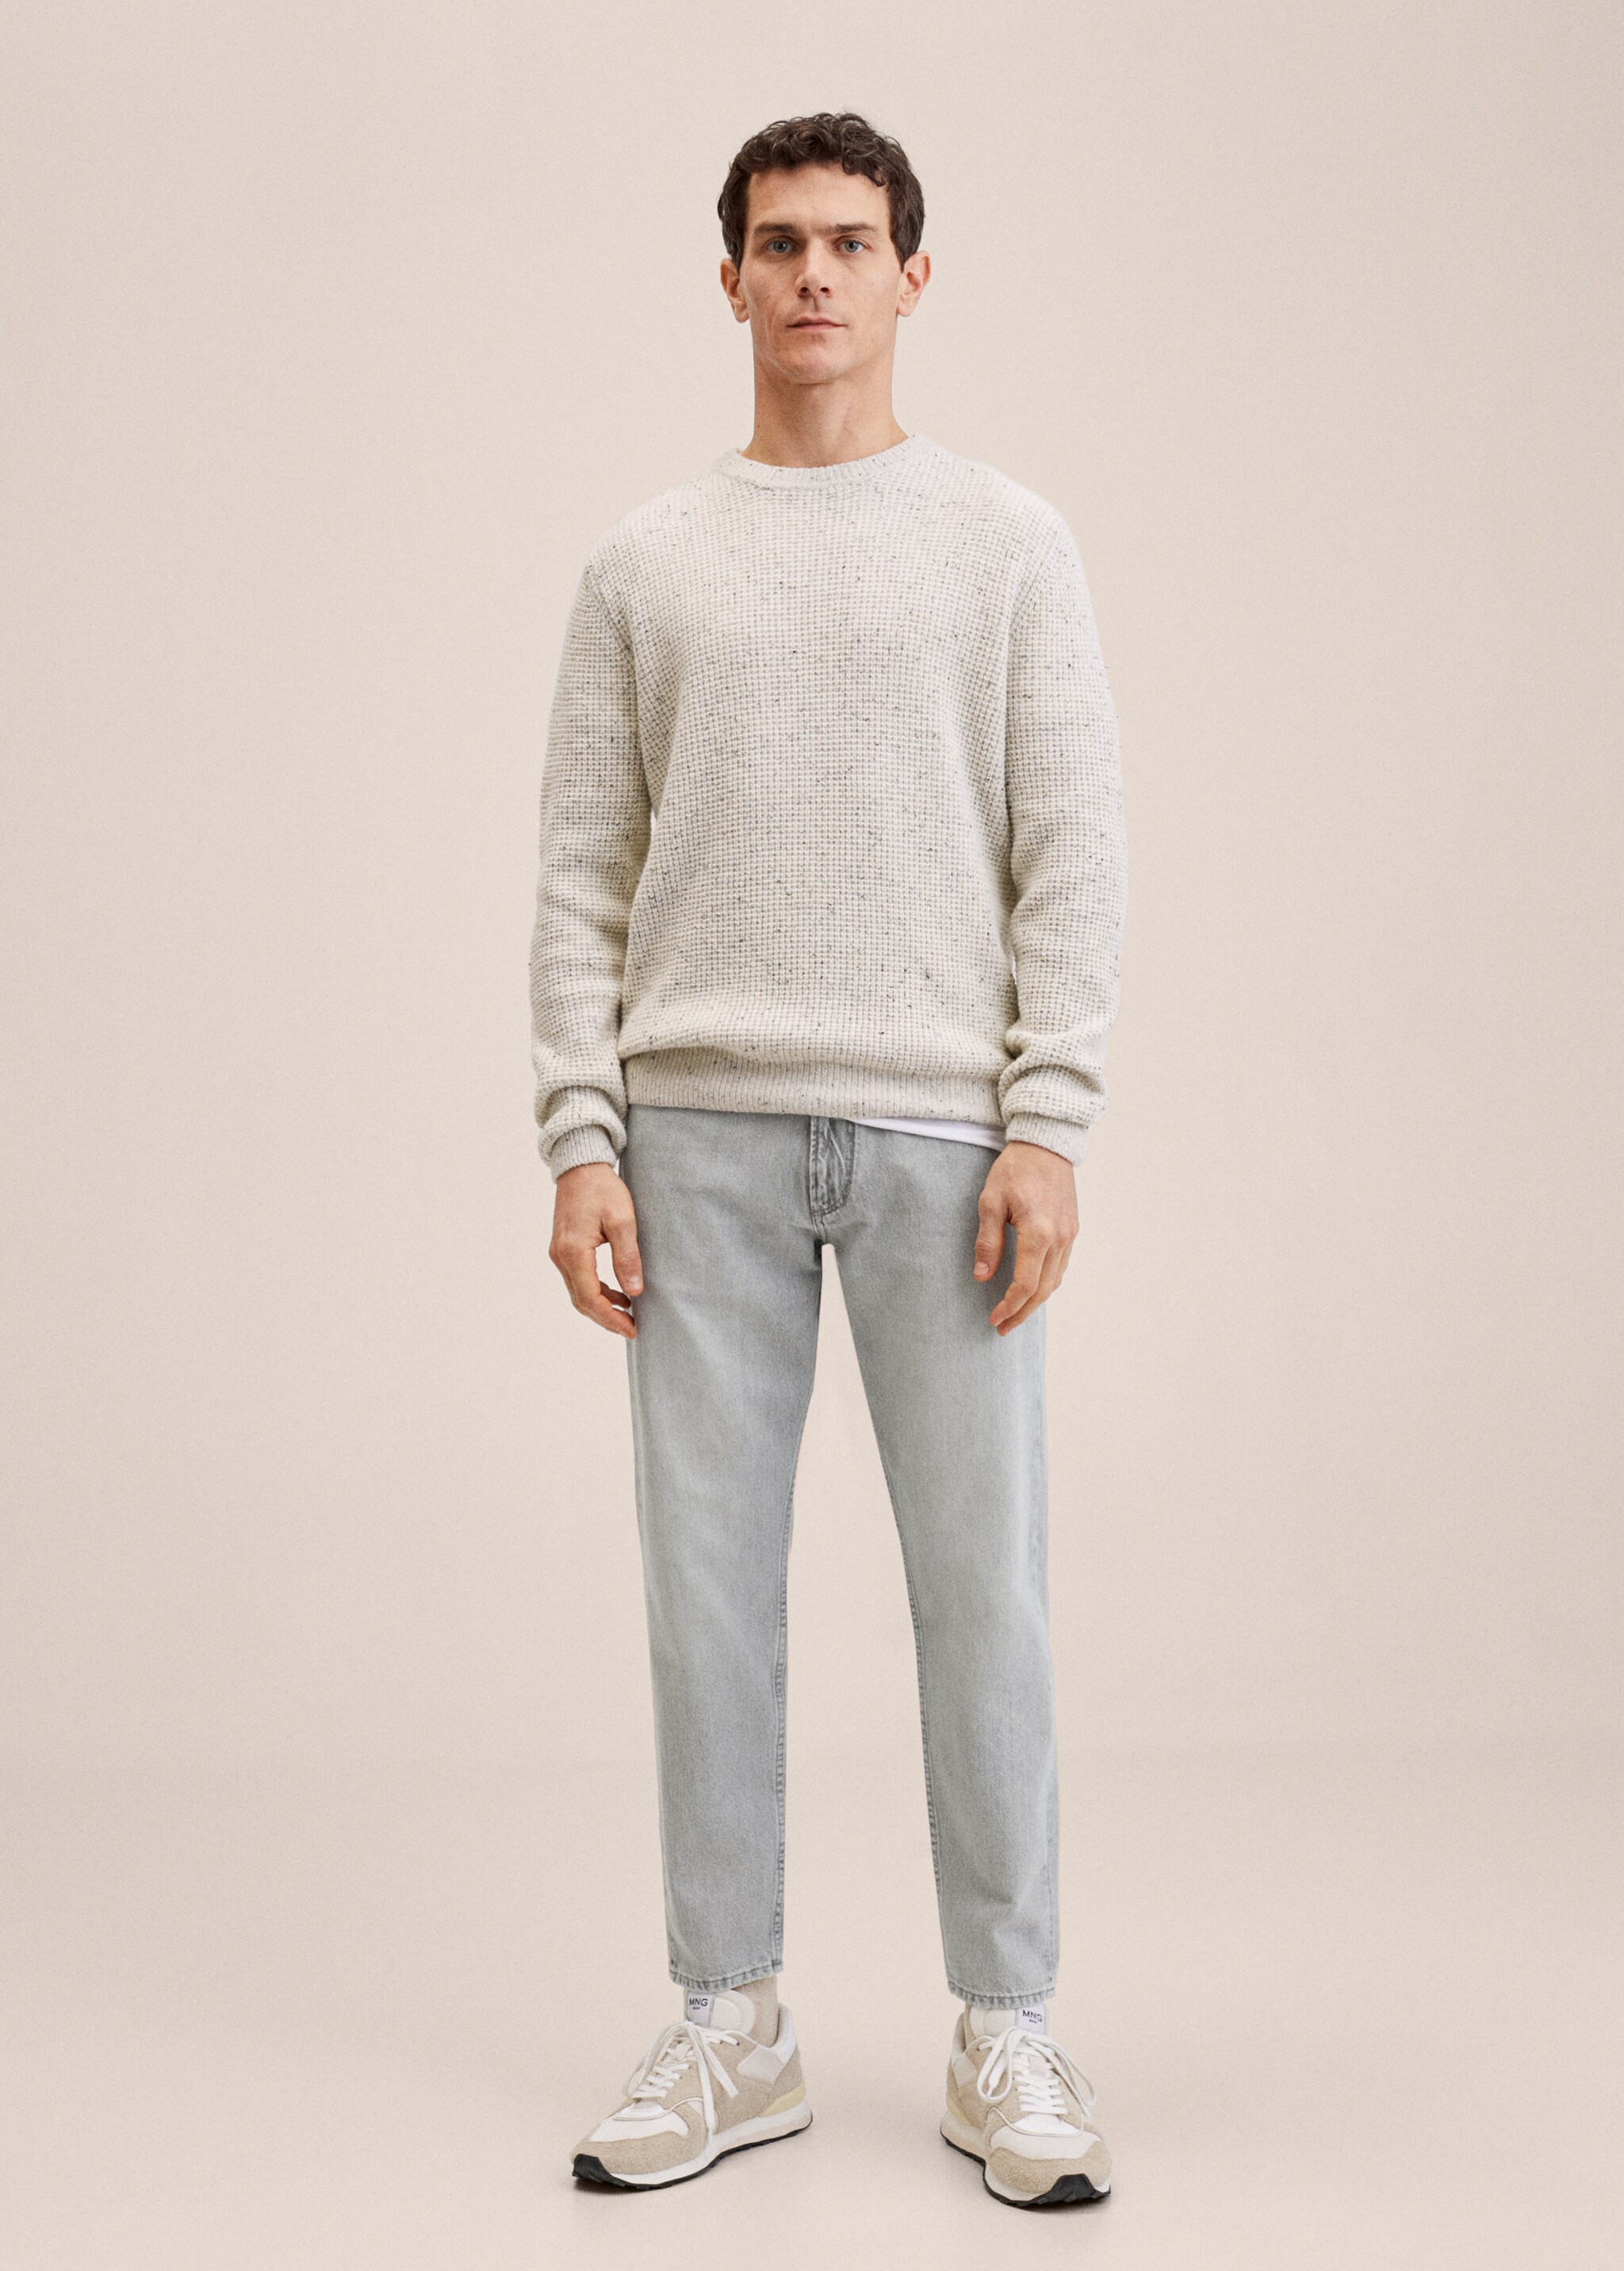 Ben tapered cropped jeans - General plane